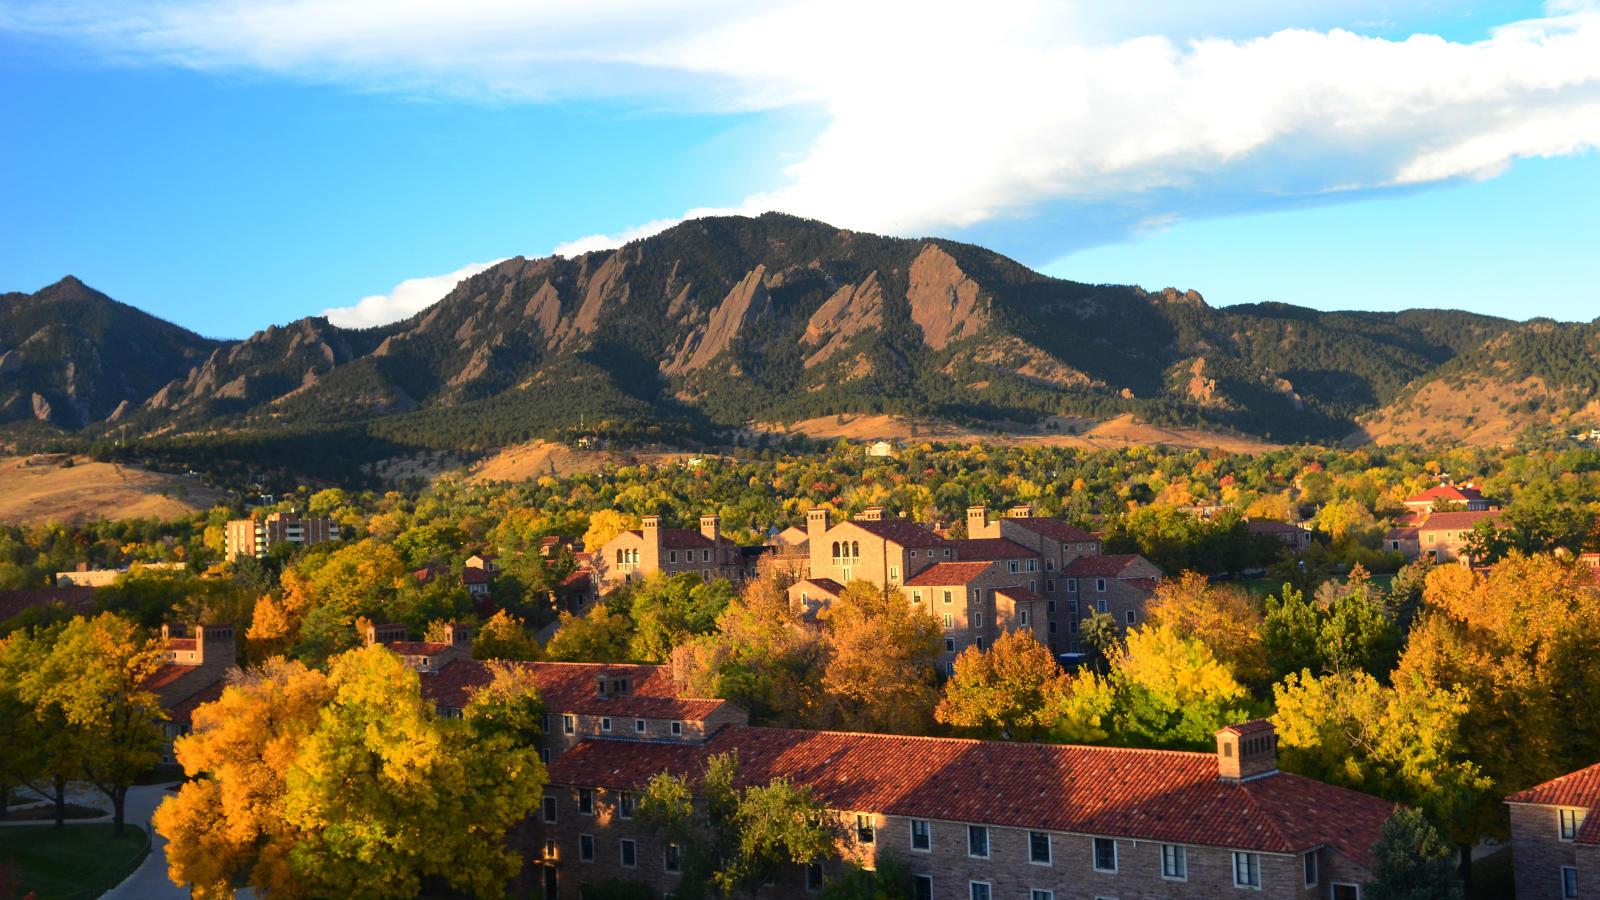 Flatirons and campus scenic at the University of Colorado Boulder